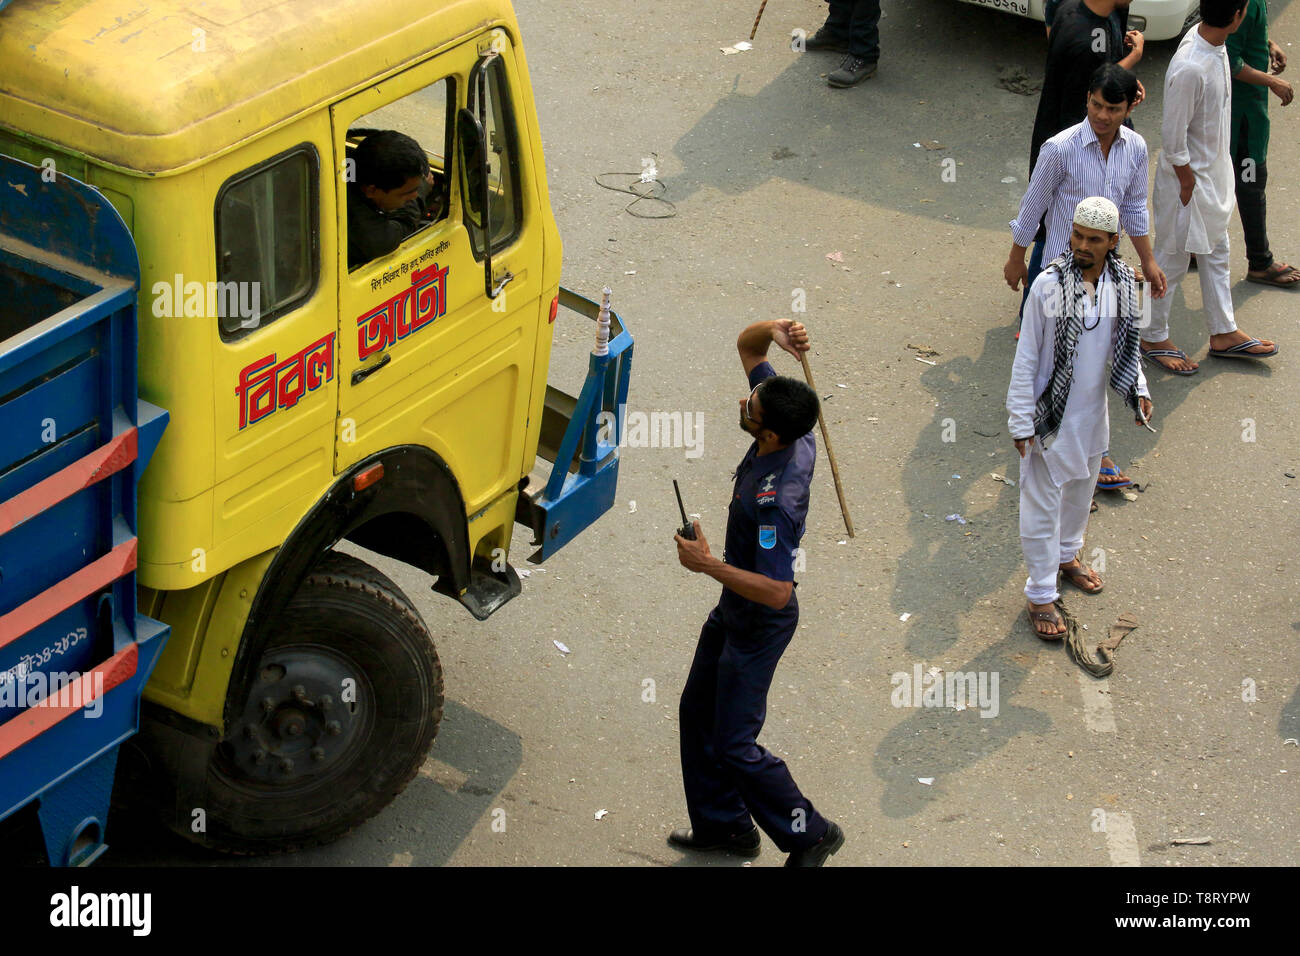 An unlawful baton charge to a truck driver by a police on the Road at Tongi in Gazipur. Bangladesh Stock Photo